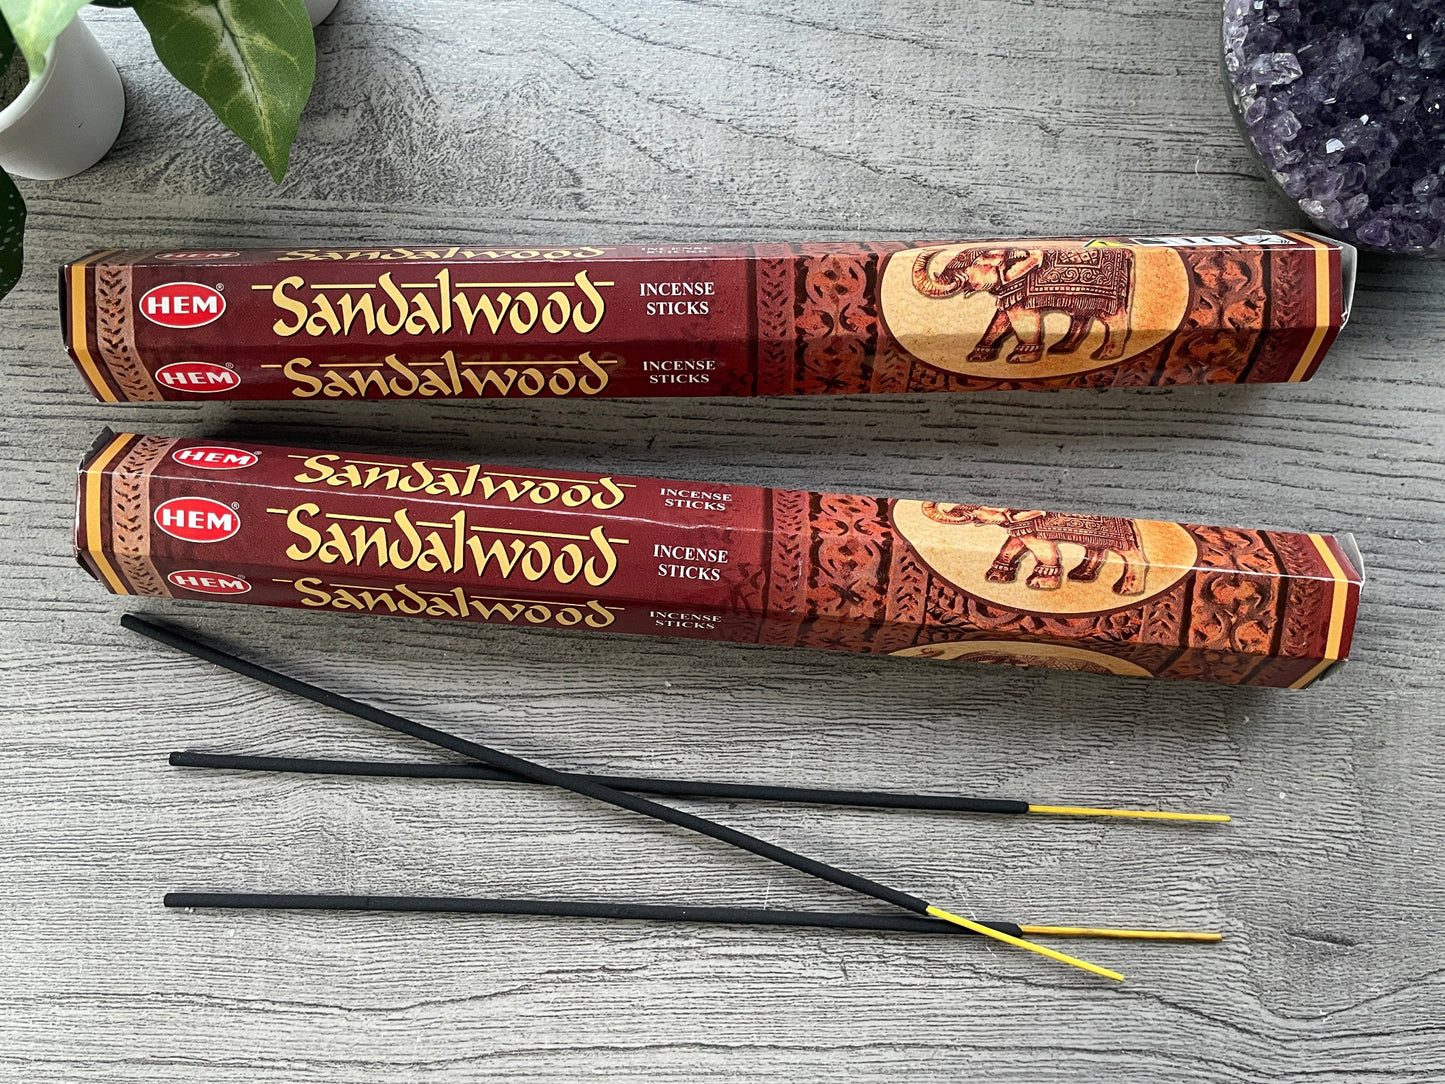 Pictured is a box of sandalwood incense.